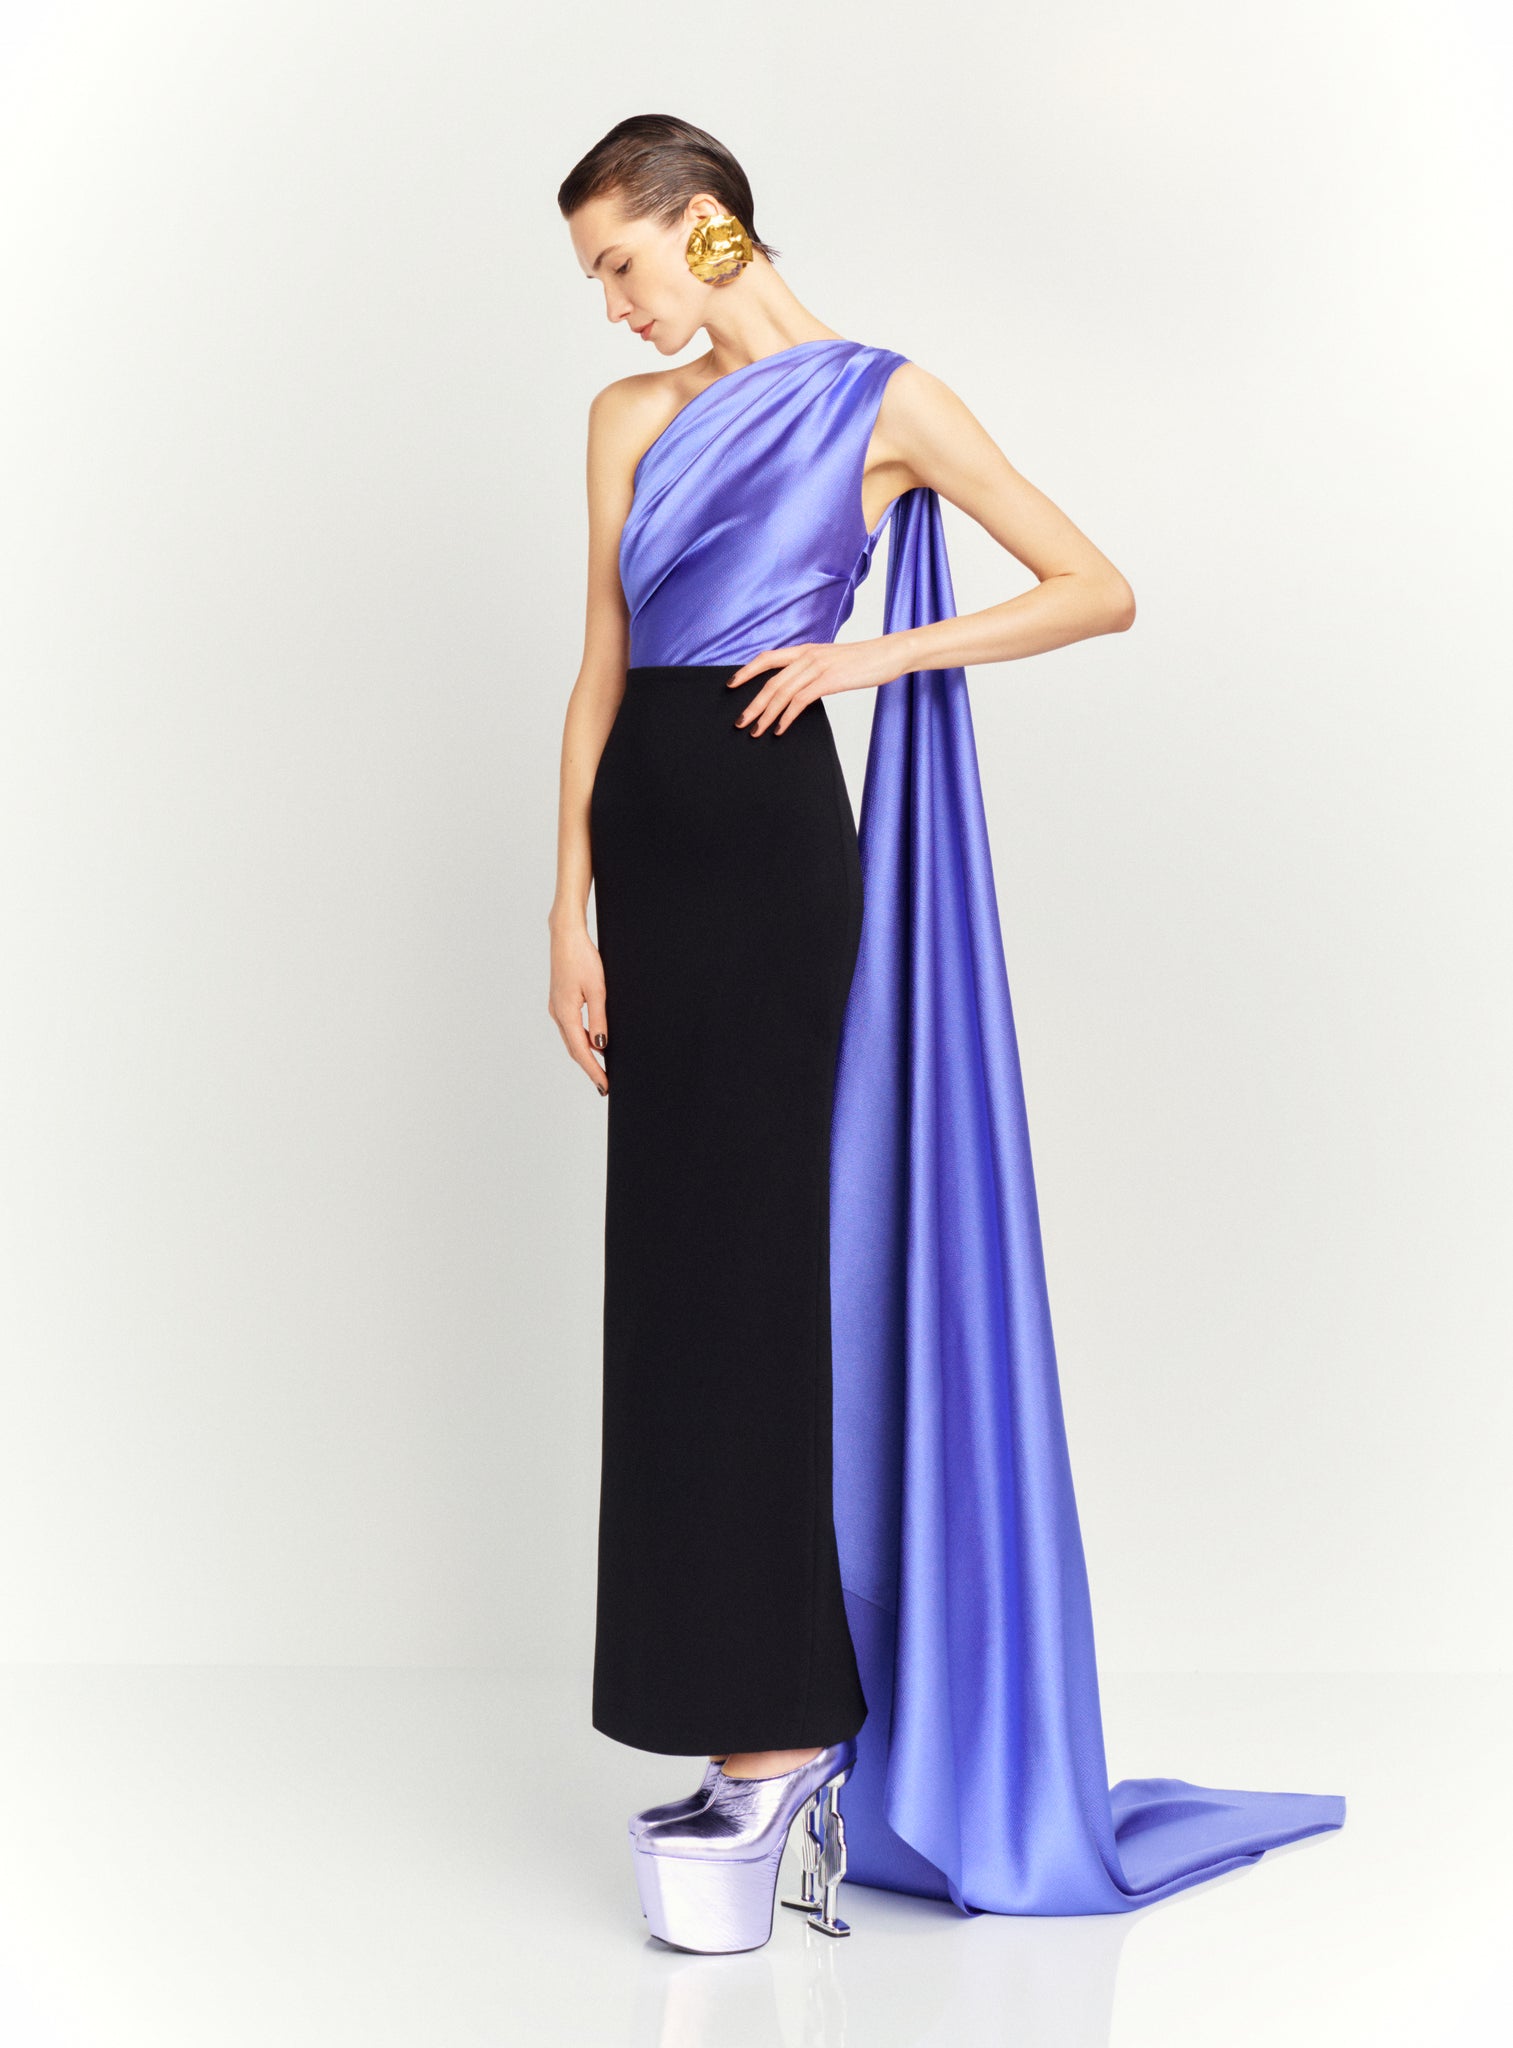 The Yeva Maxi Dress in Periwinkle and Black